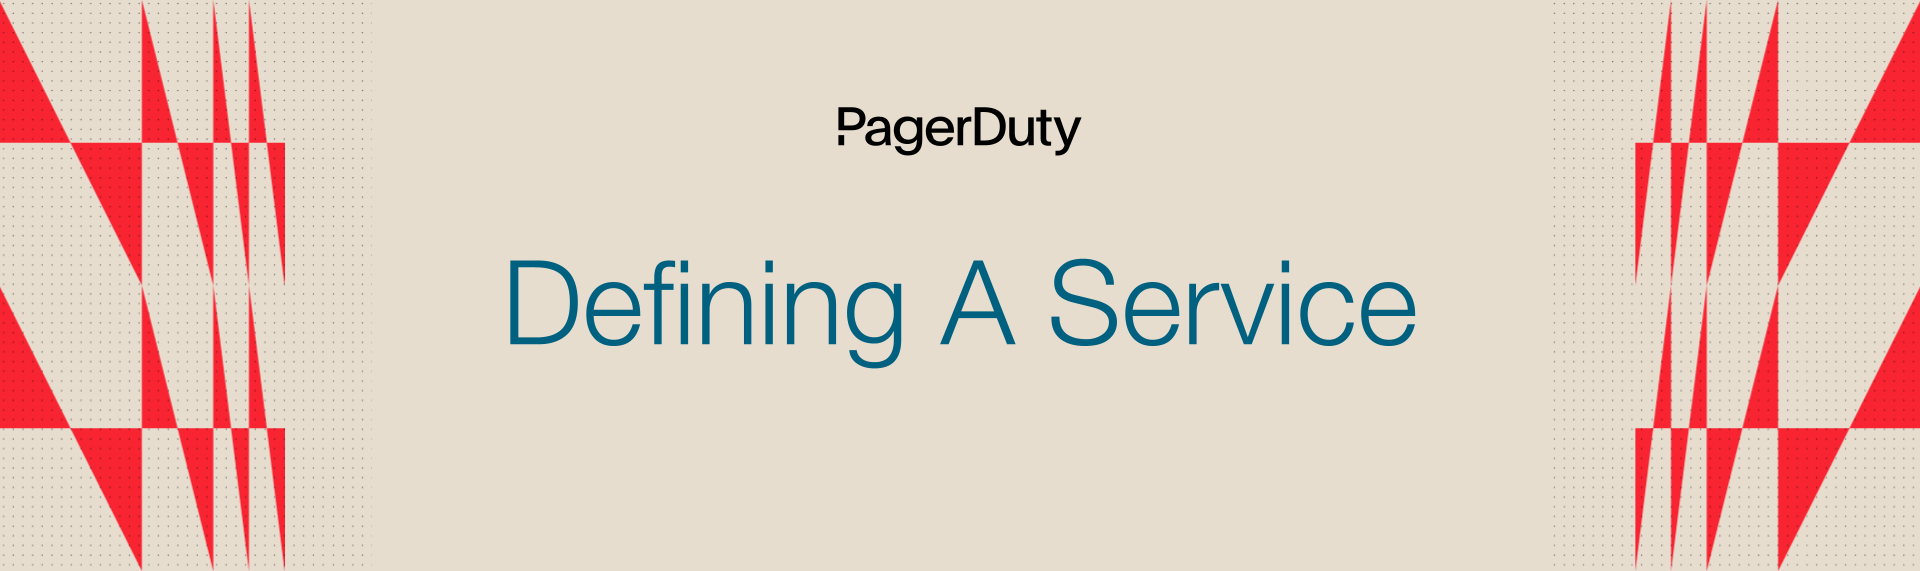 Defining a Service